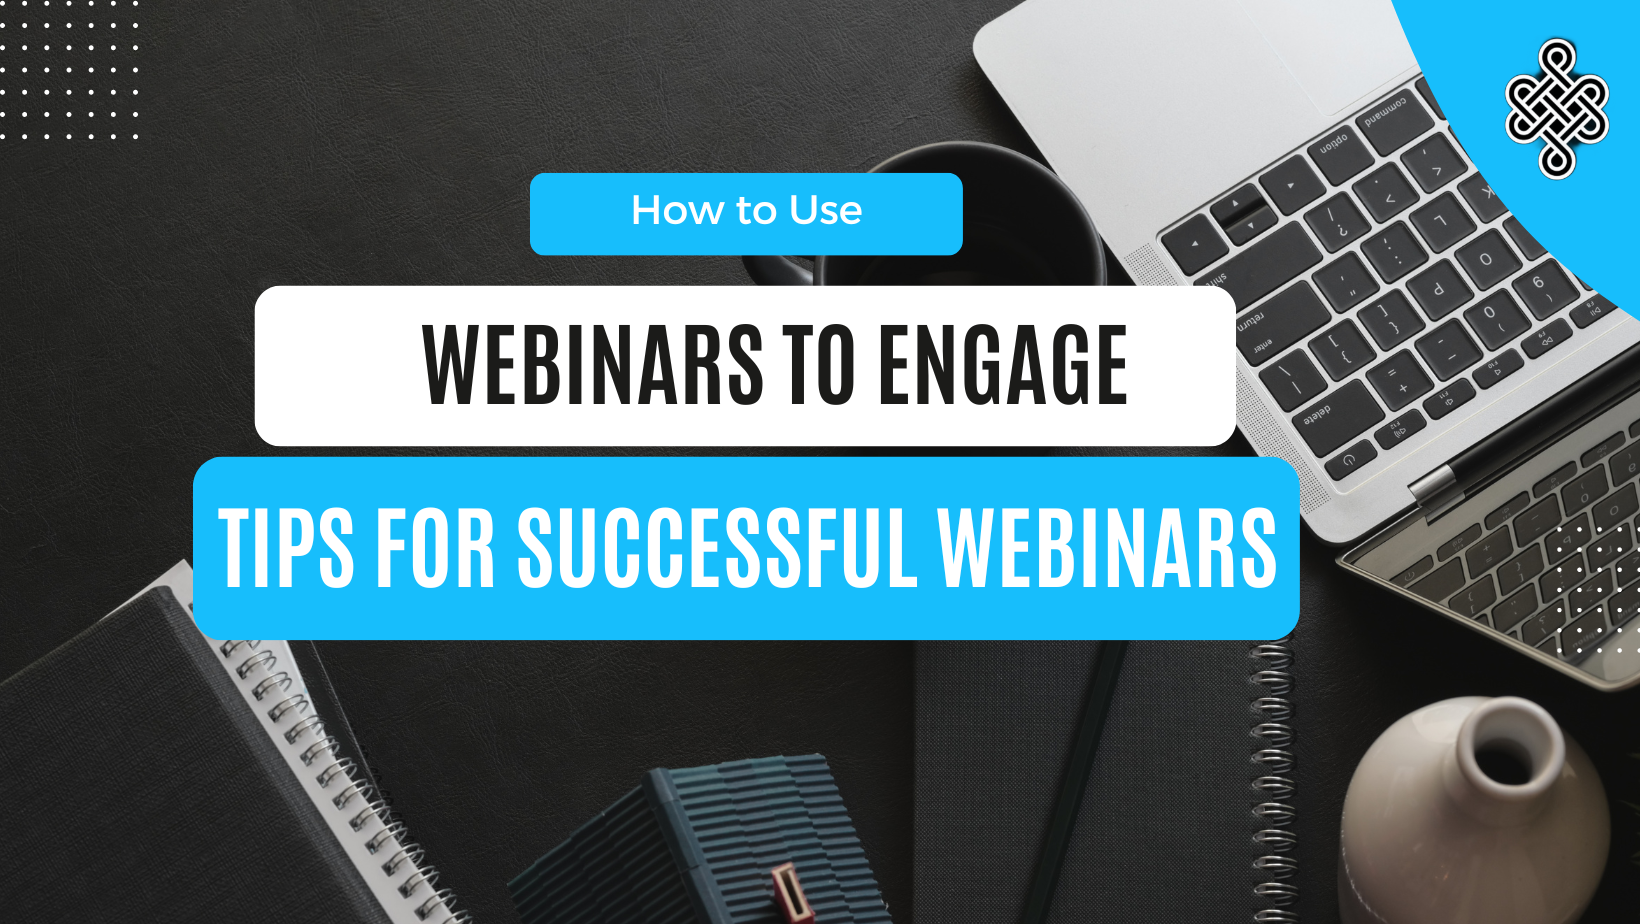 How to Use Webinars to Engage with Your Audience | Tips for Successful Webinars